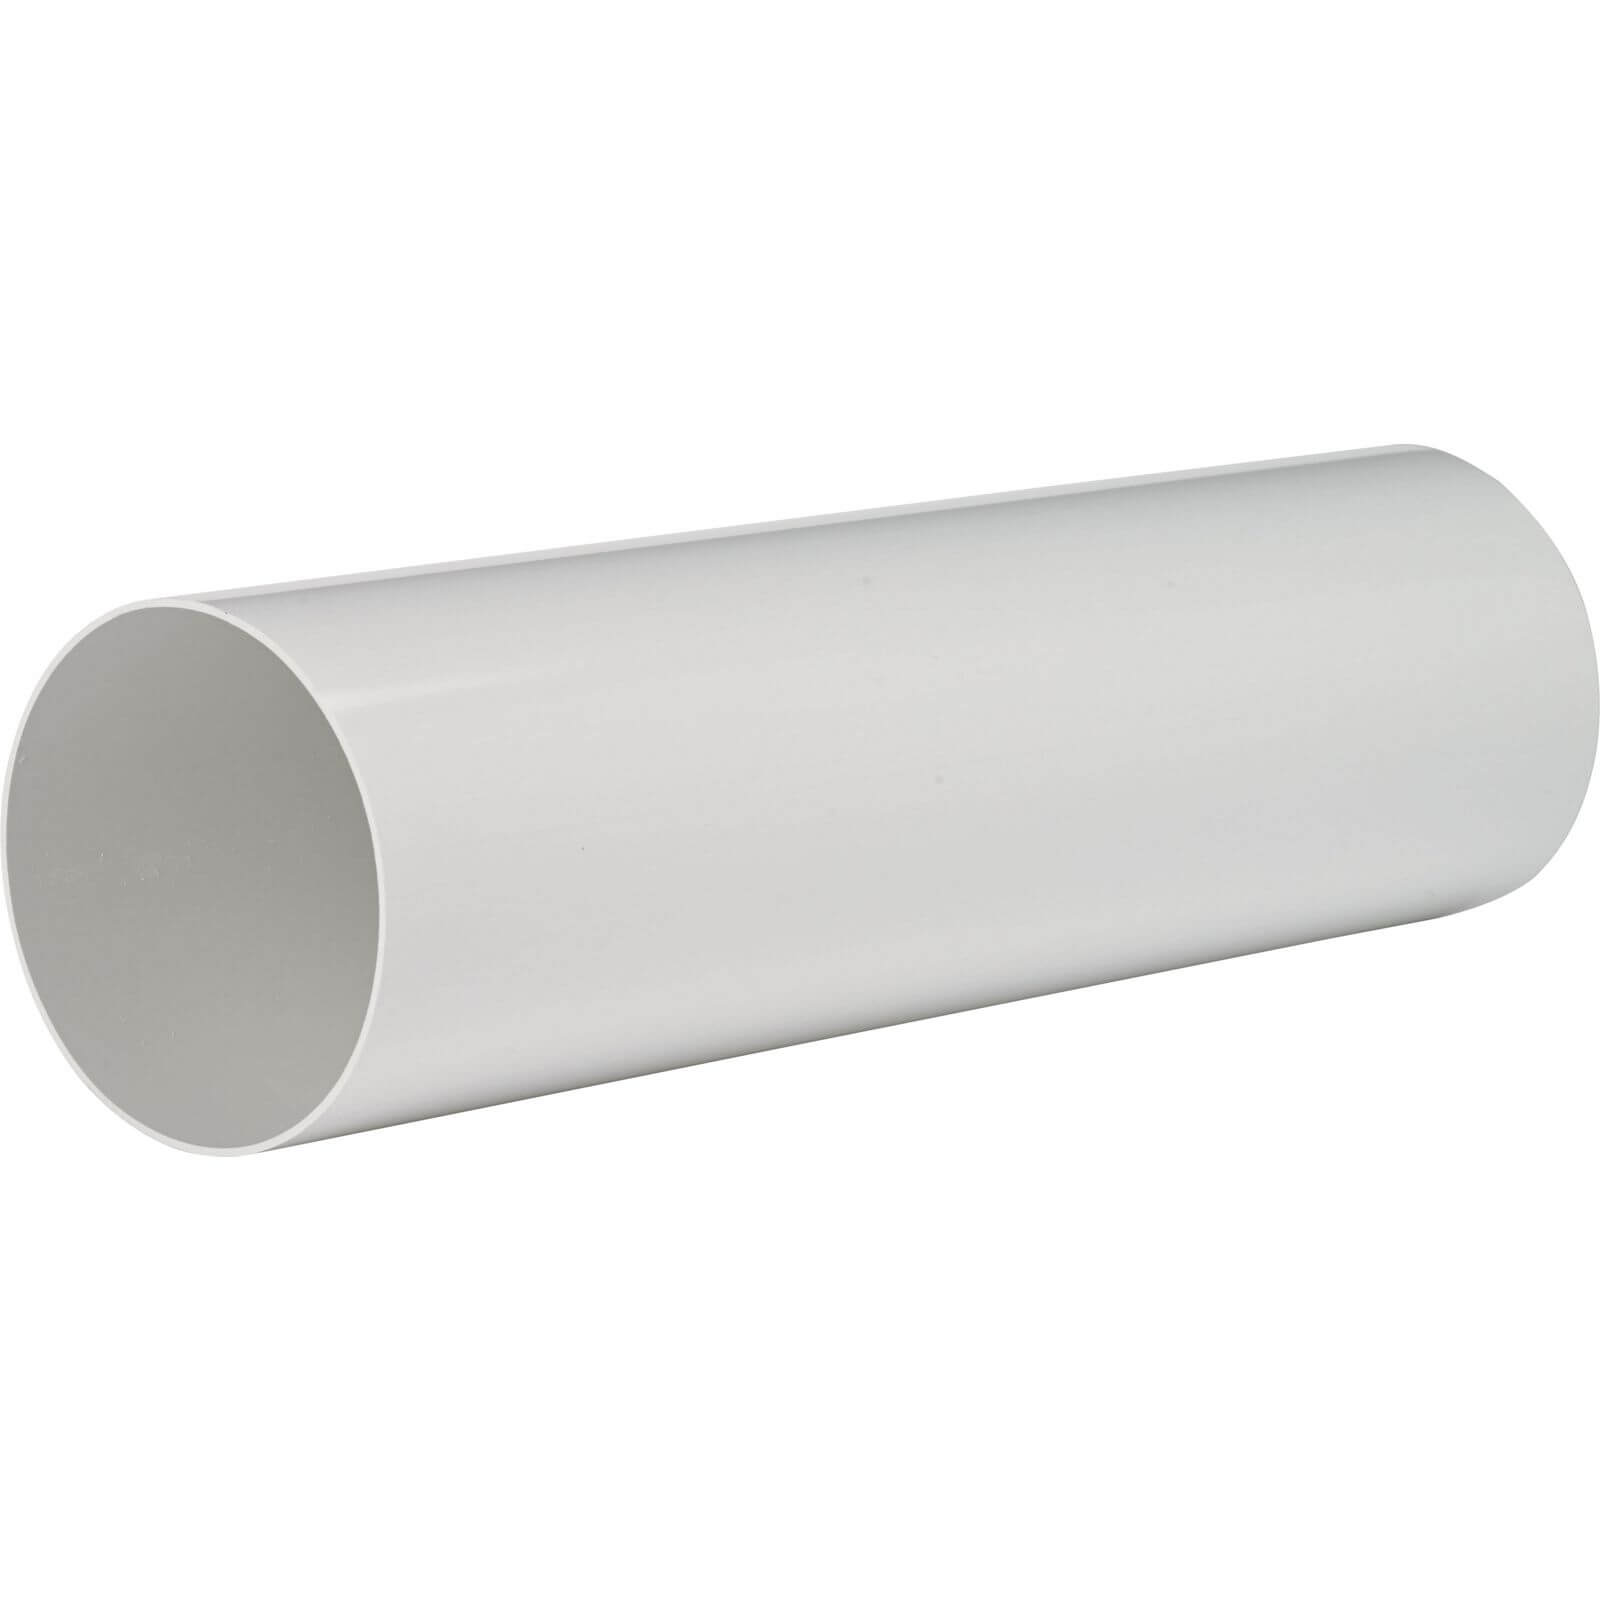 Photo of Round Ducting Pipe 350mm 4in